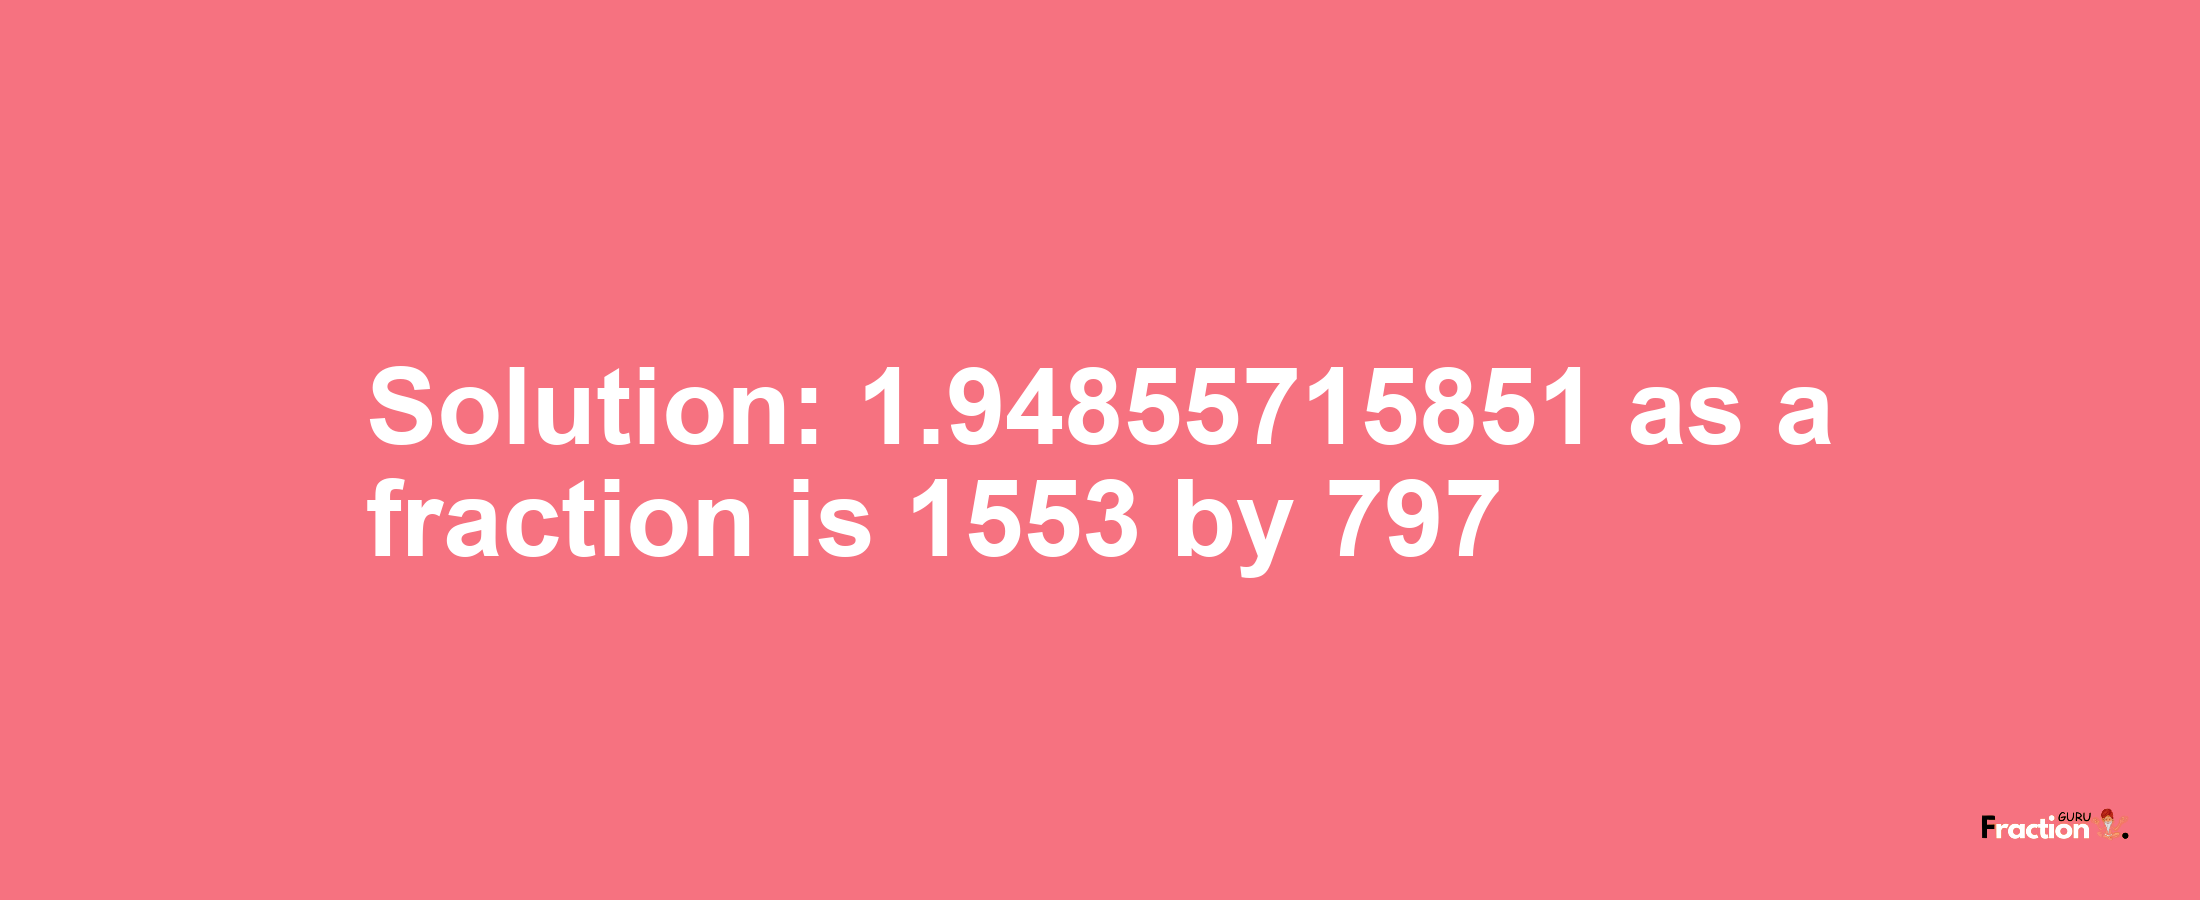 Solution:1.94855715851 as a fraction is 1553/797